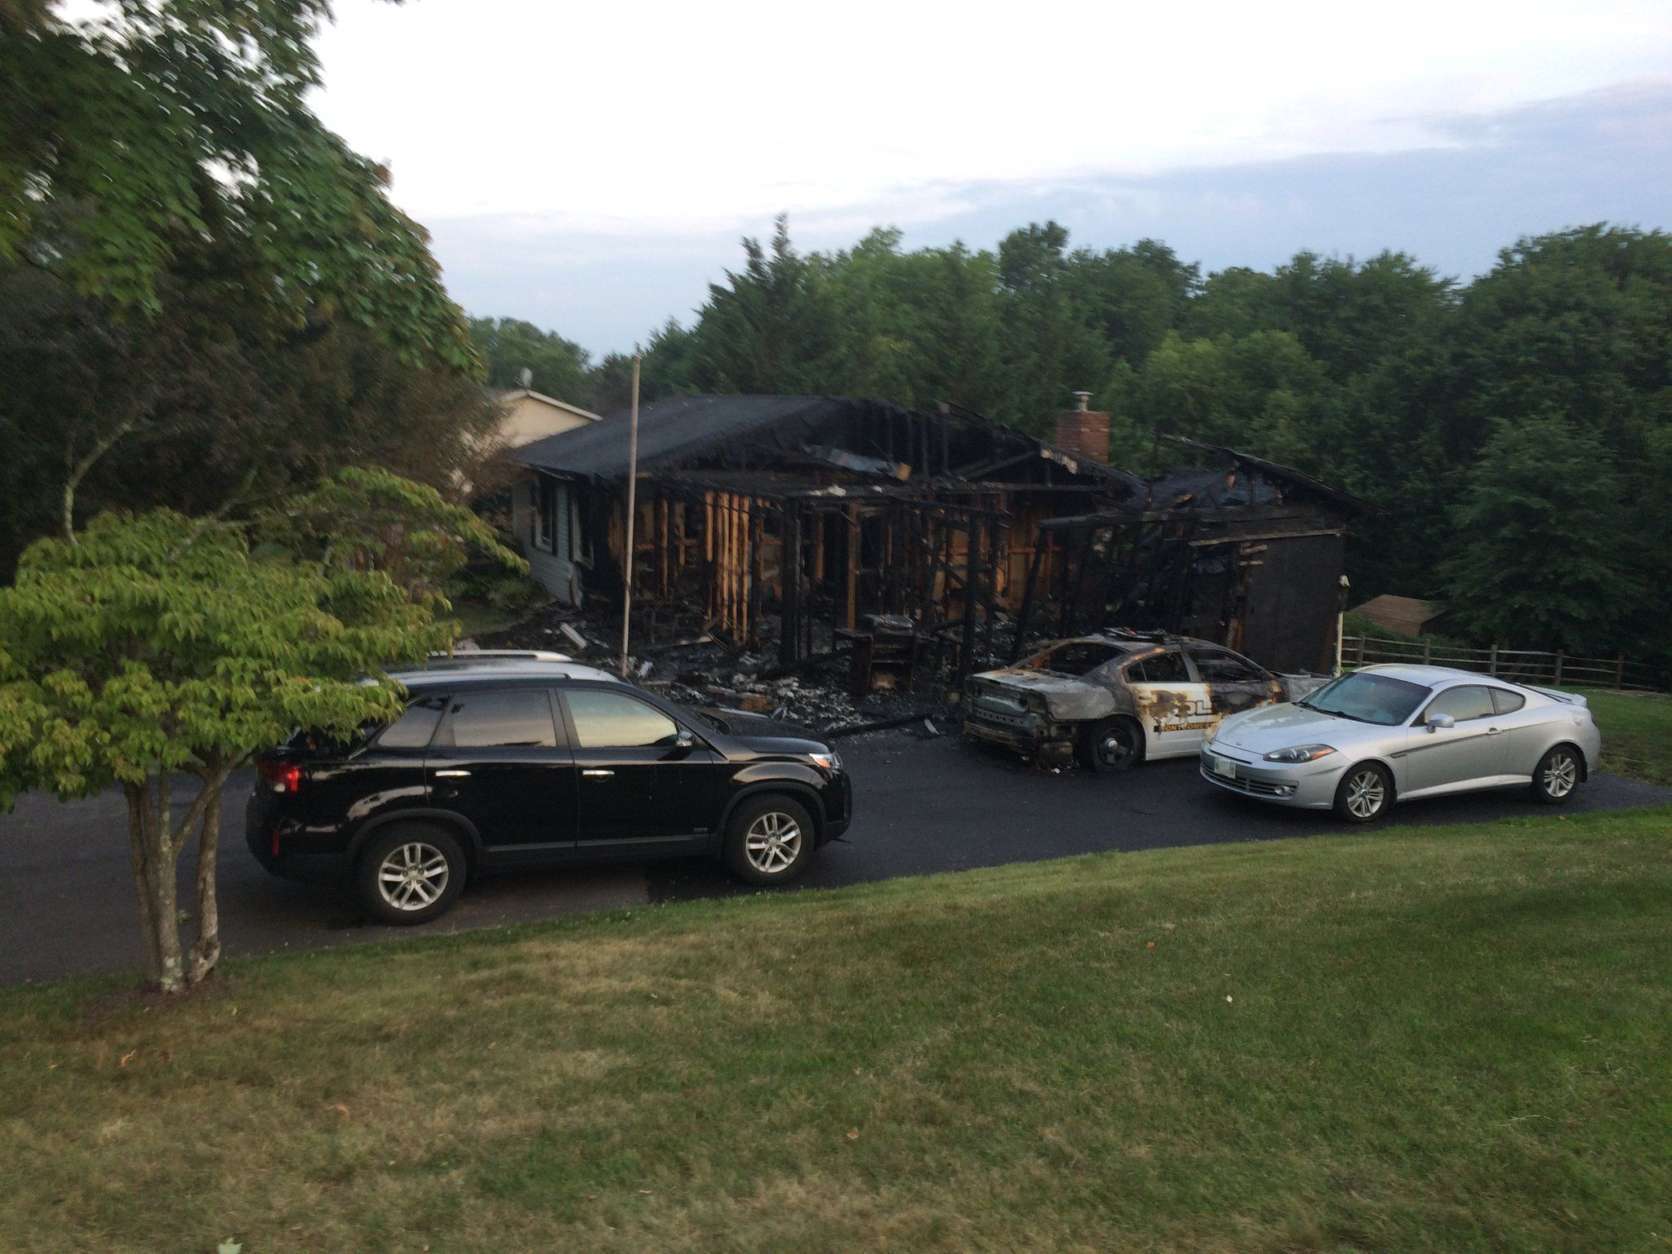 A police cruiser and home were destroyed by fire early Friday morning. (WTOP/Nick Iannelli)